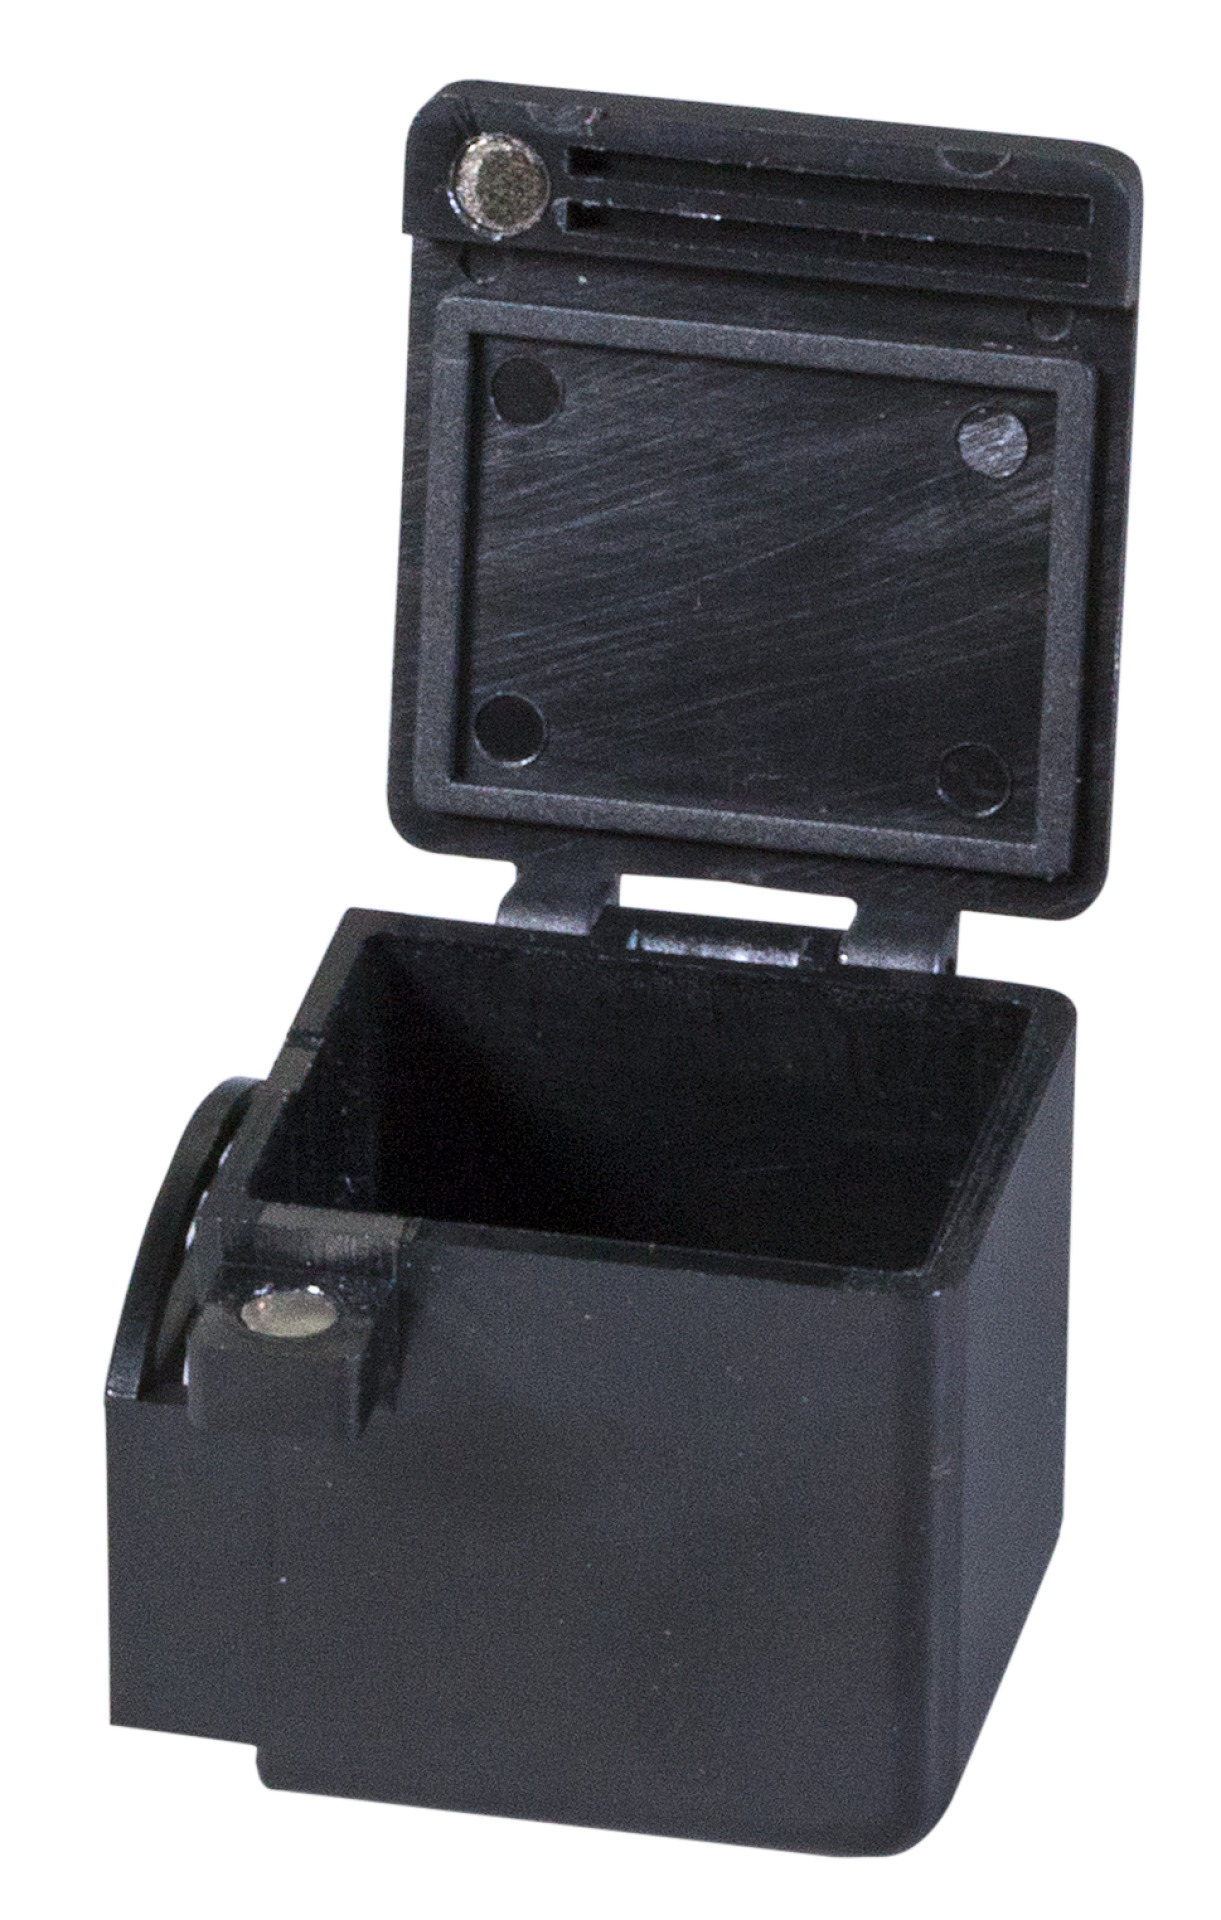 Fiber garbage can for HS18-CLEAVER